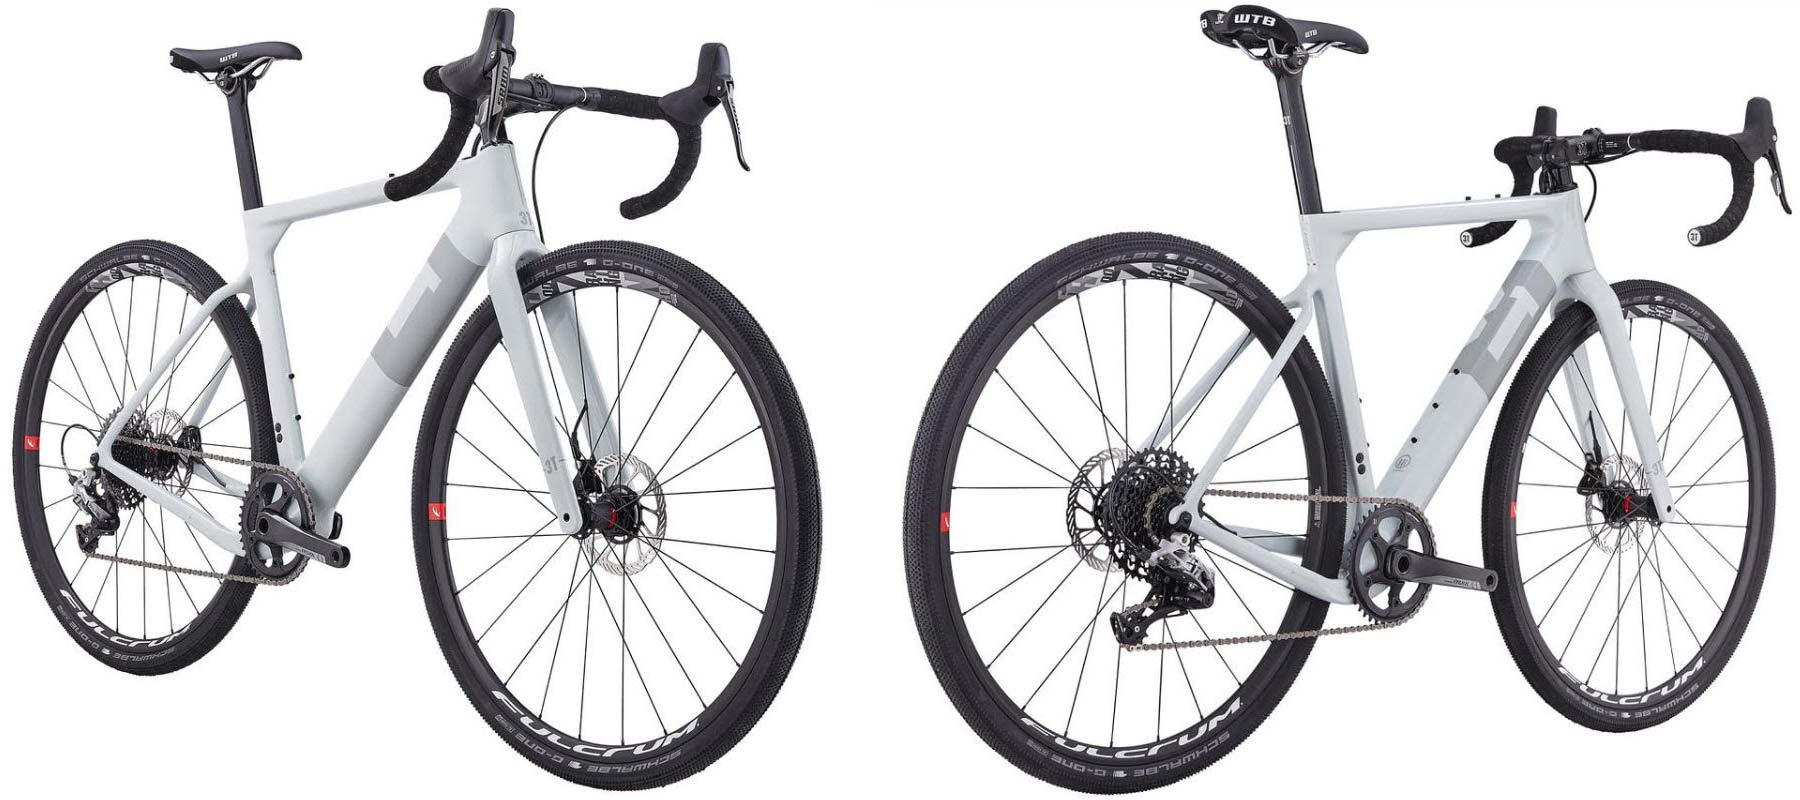 New Exploro options: Pro GRX or Rival & Team Force/Eagle AXS